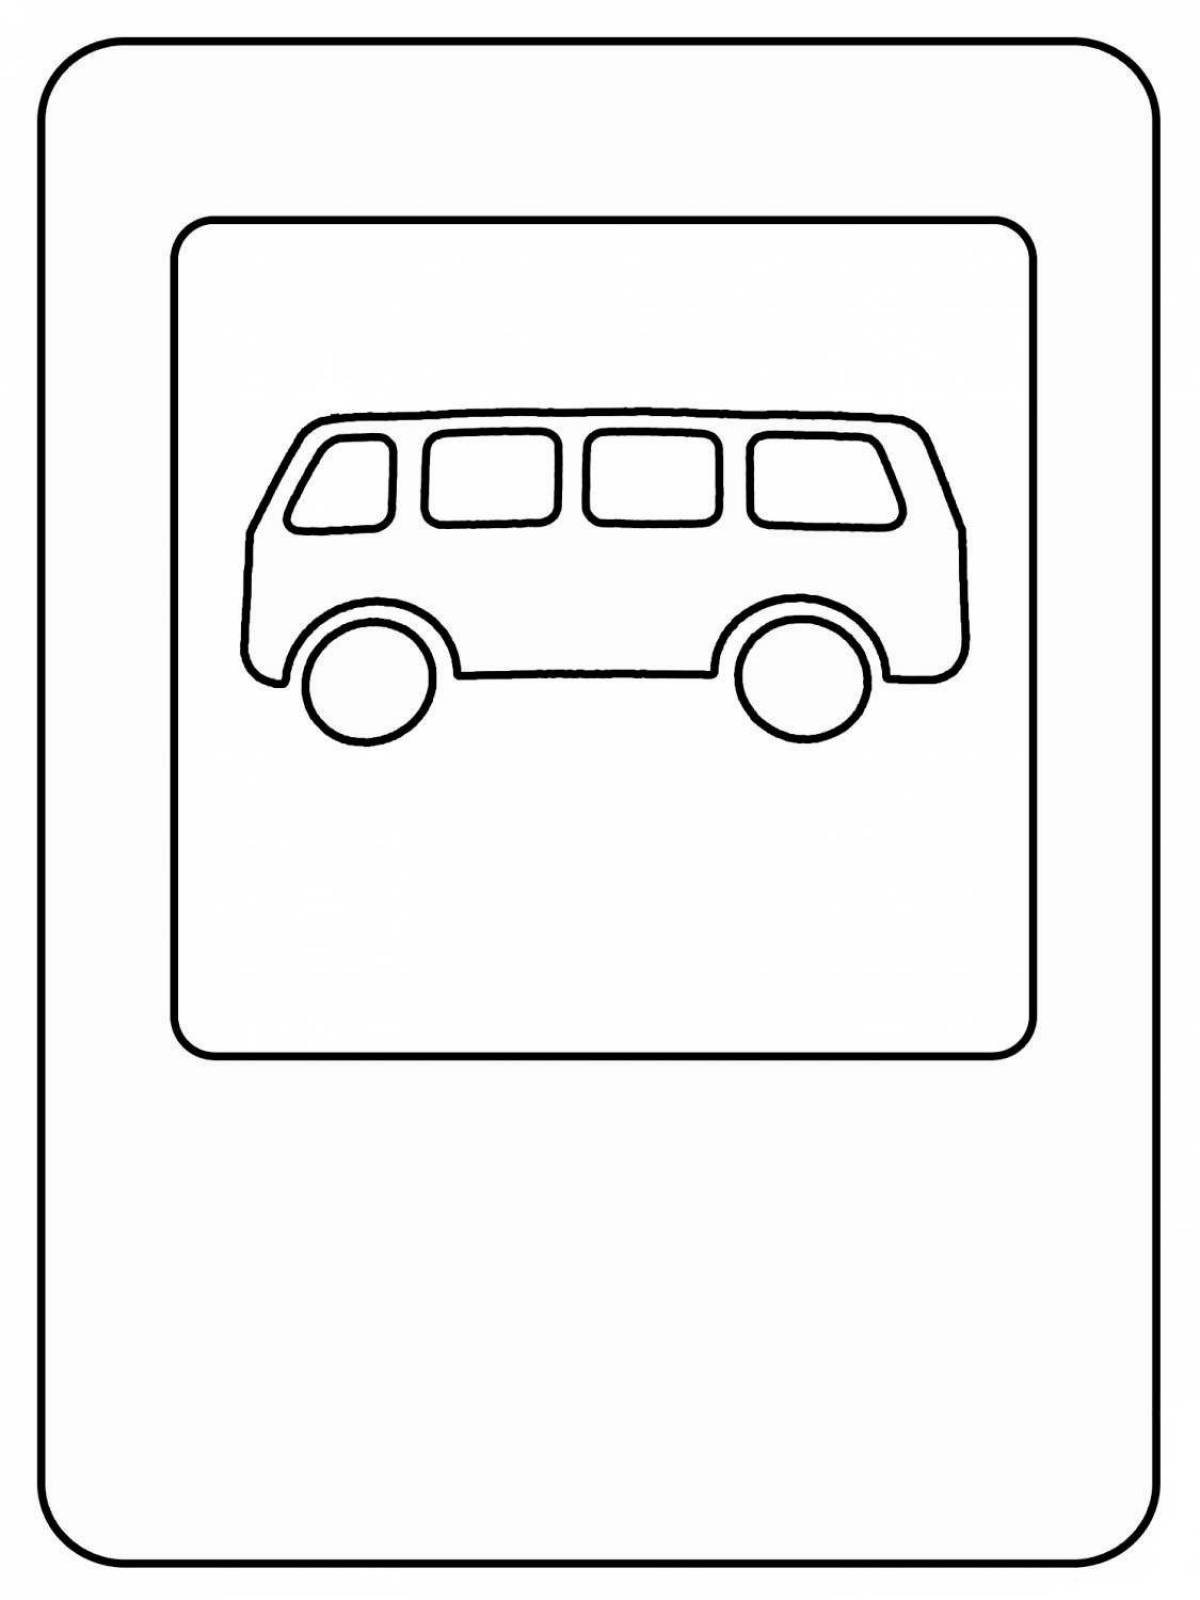 Colored Road Sign Coloring Page for 5-6 year olds